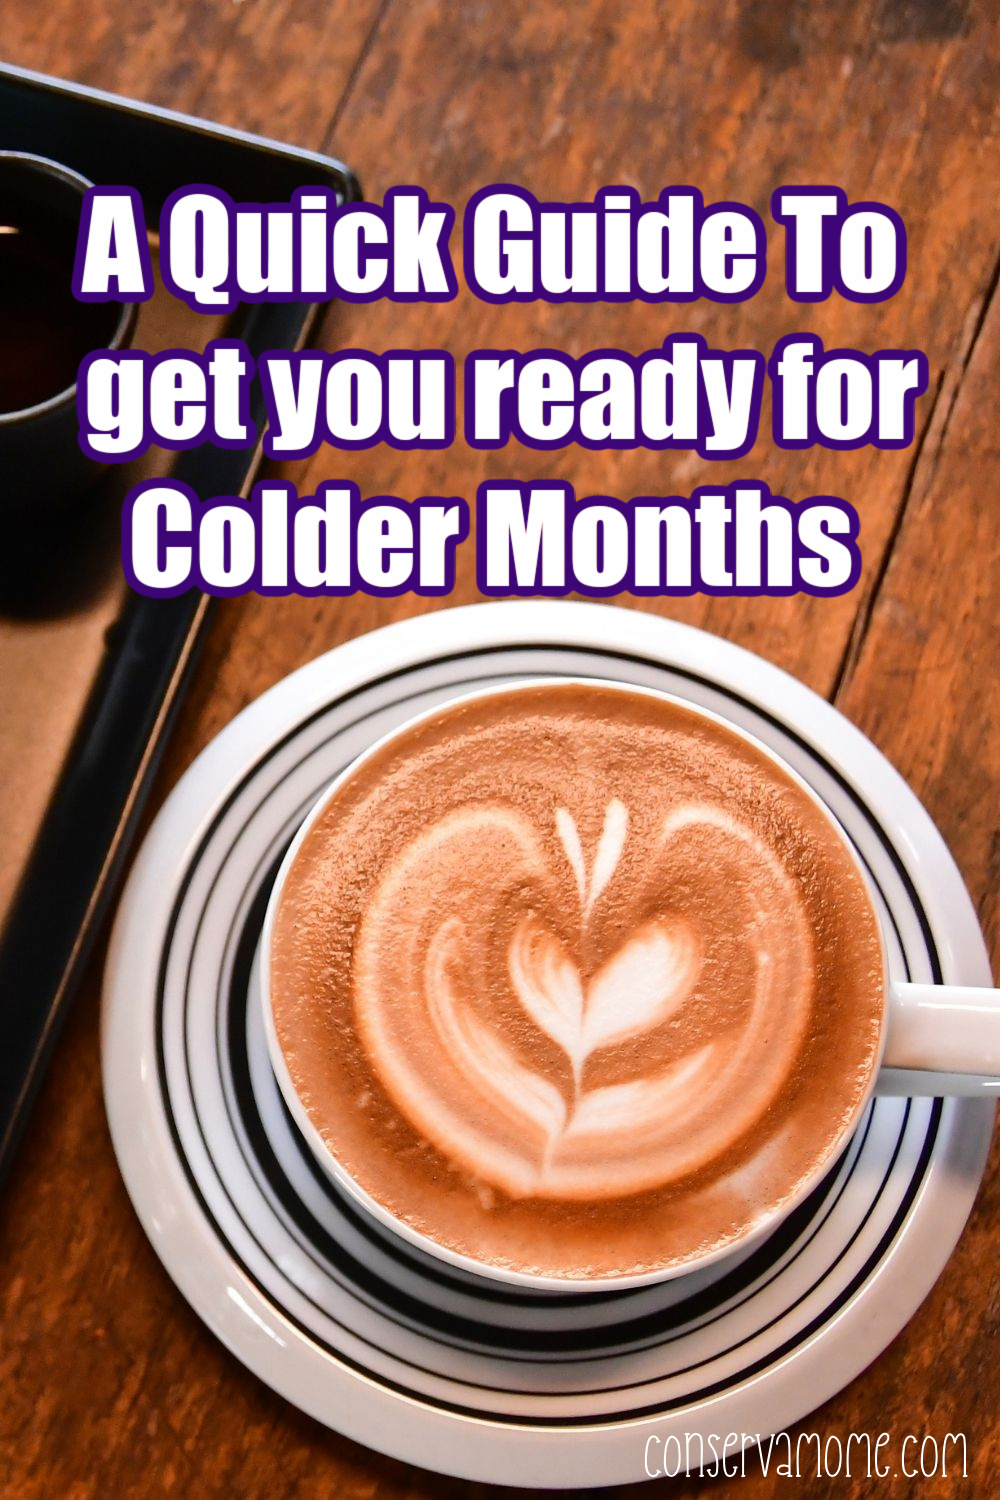 A Quick Guide To get you ready for Colder Months